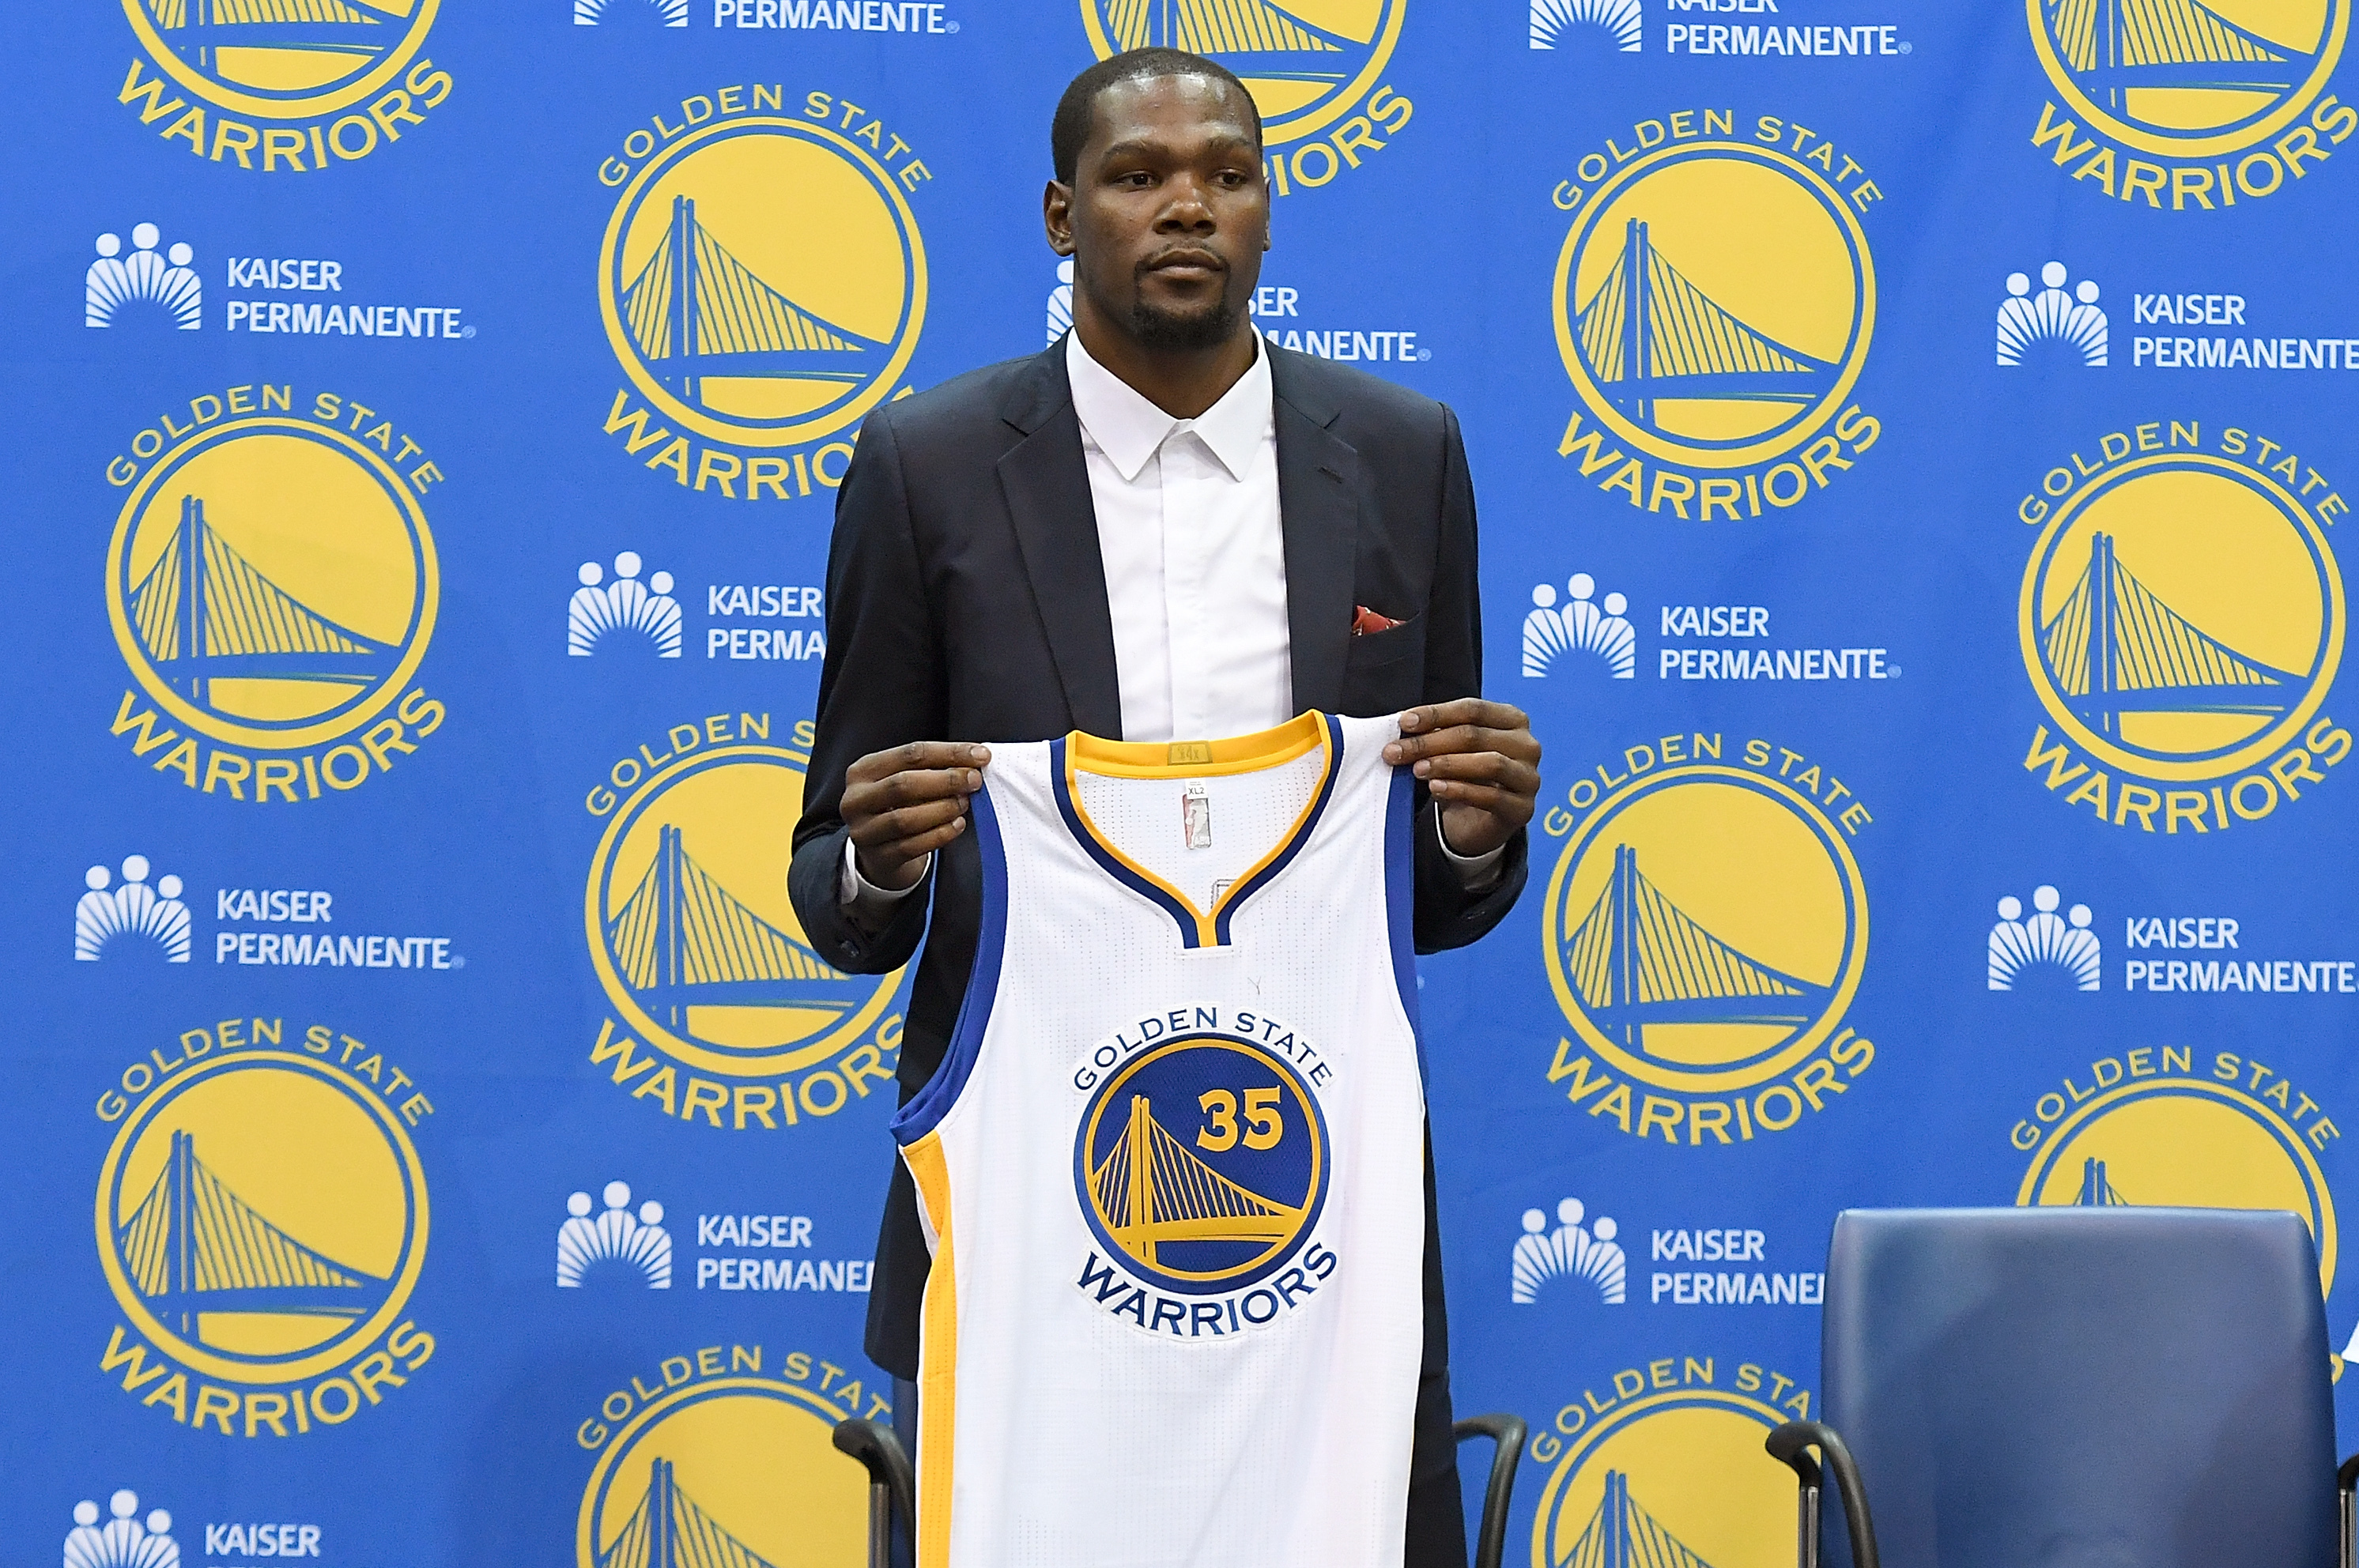 Kevin Durant to sign with Warriors, leave OKC